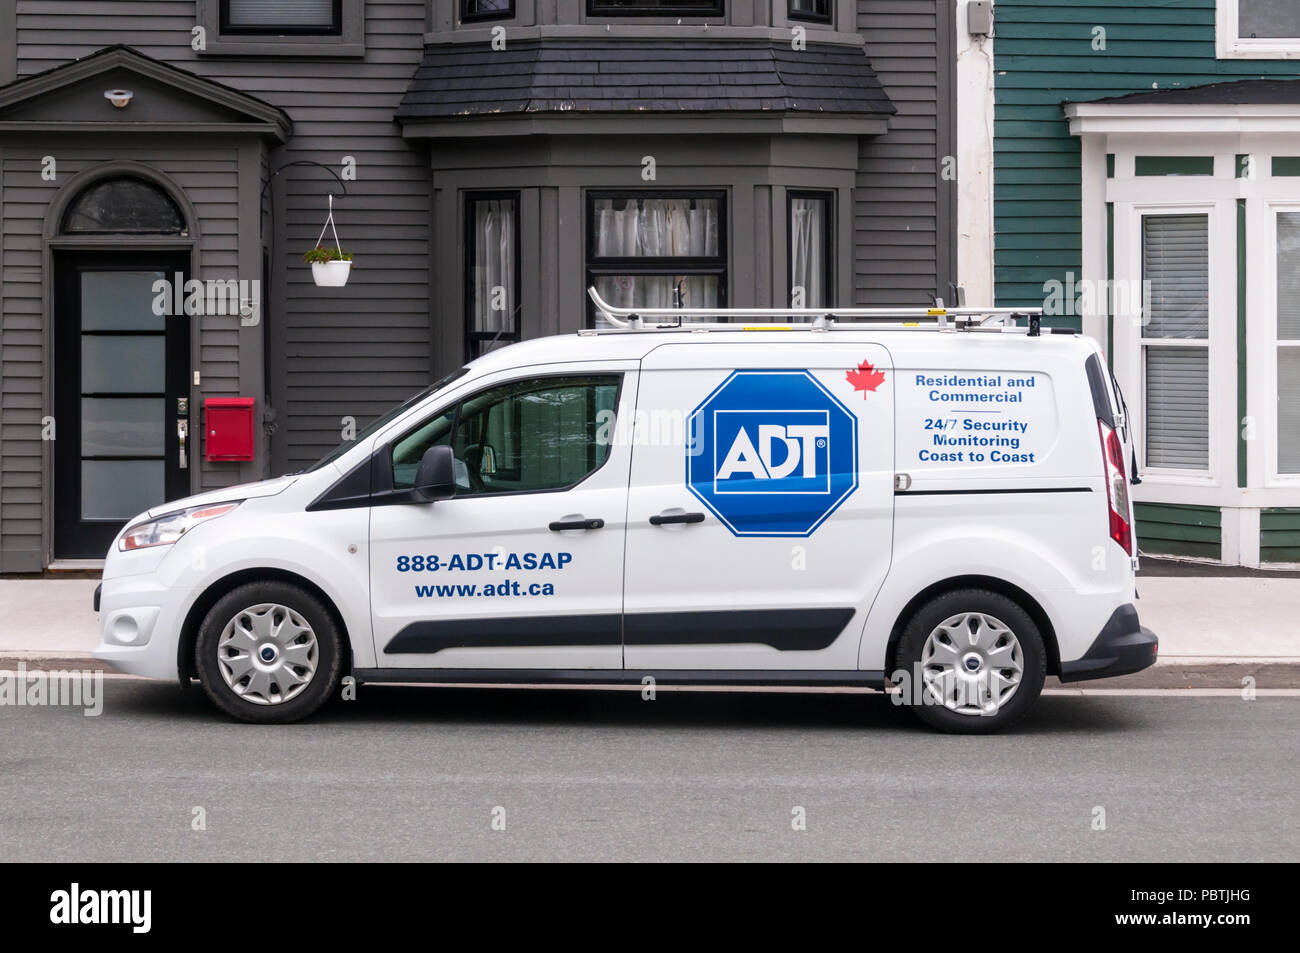 An ADT Residential & Commercial Security van in St John's, Newfoundland. Stock Photo